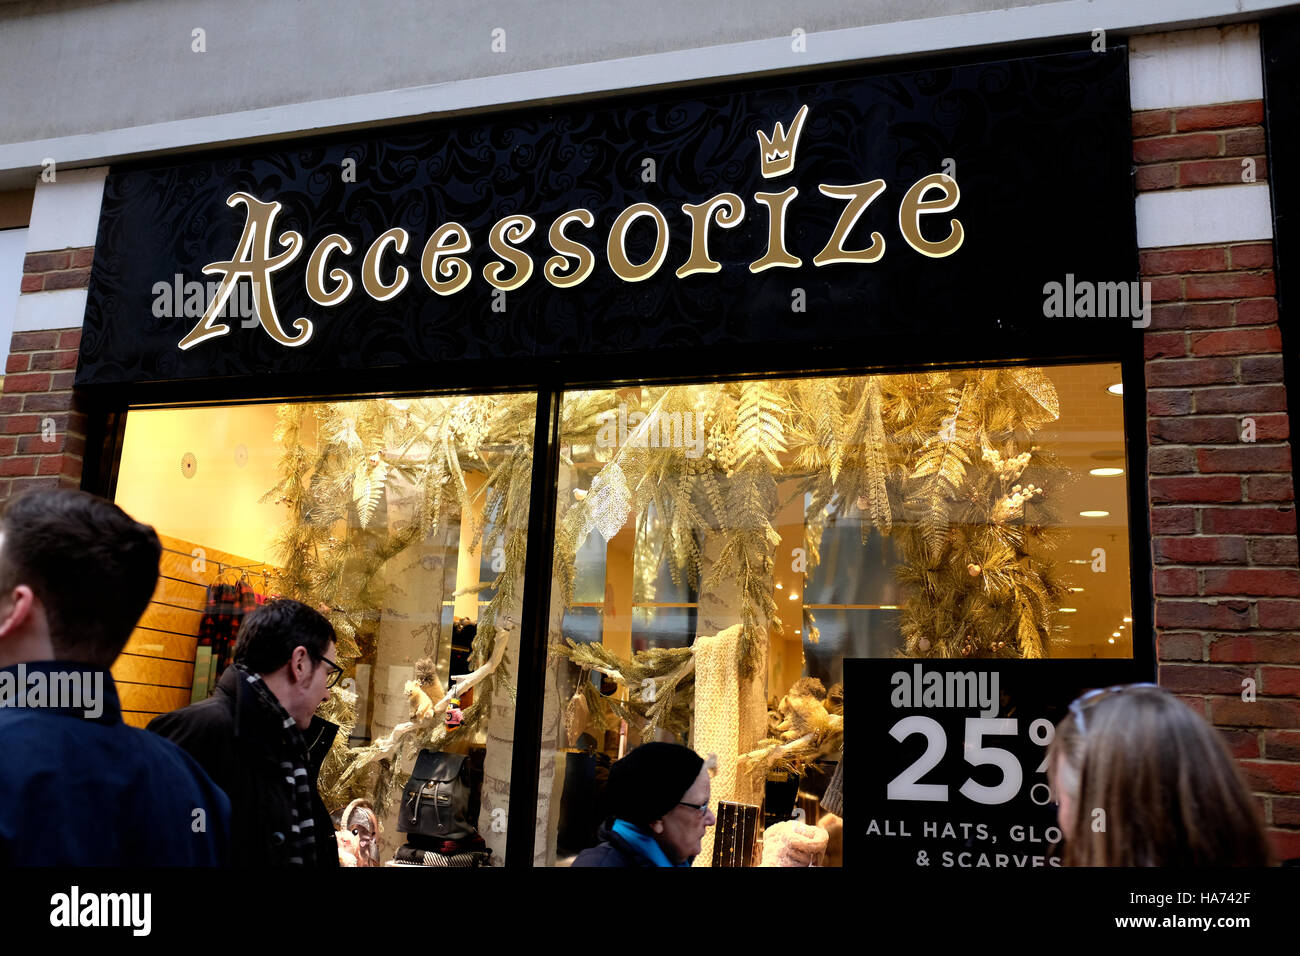 accessorize new womens fashions and accessories retail shop city of HA742F